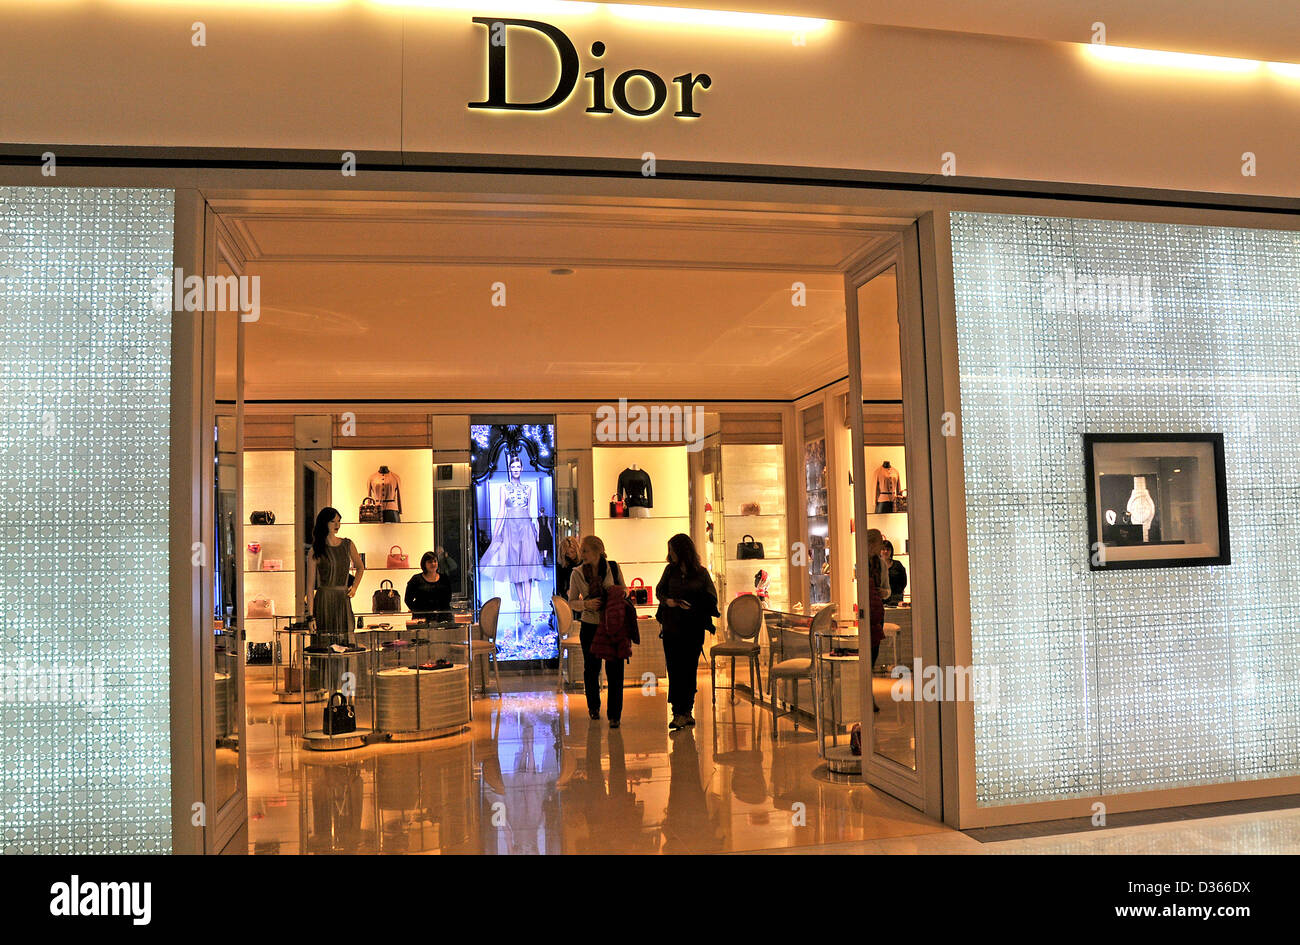 dior charles de gaulle airport